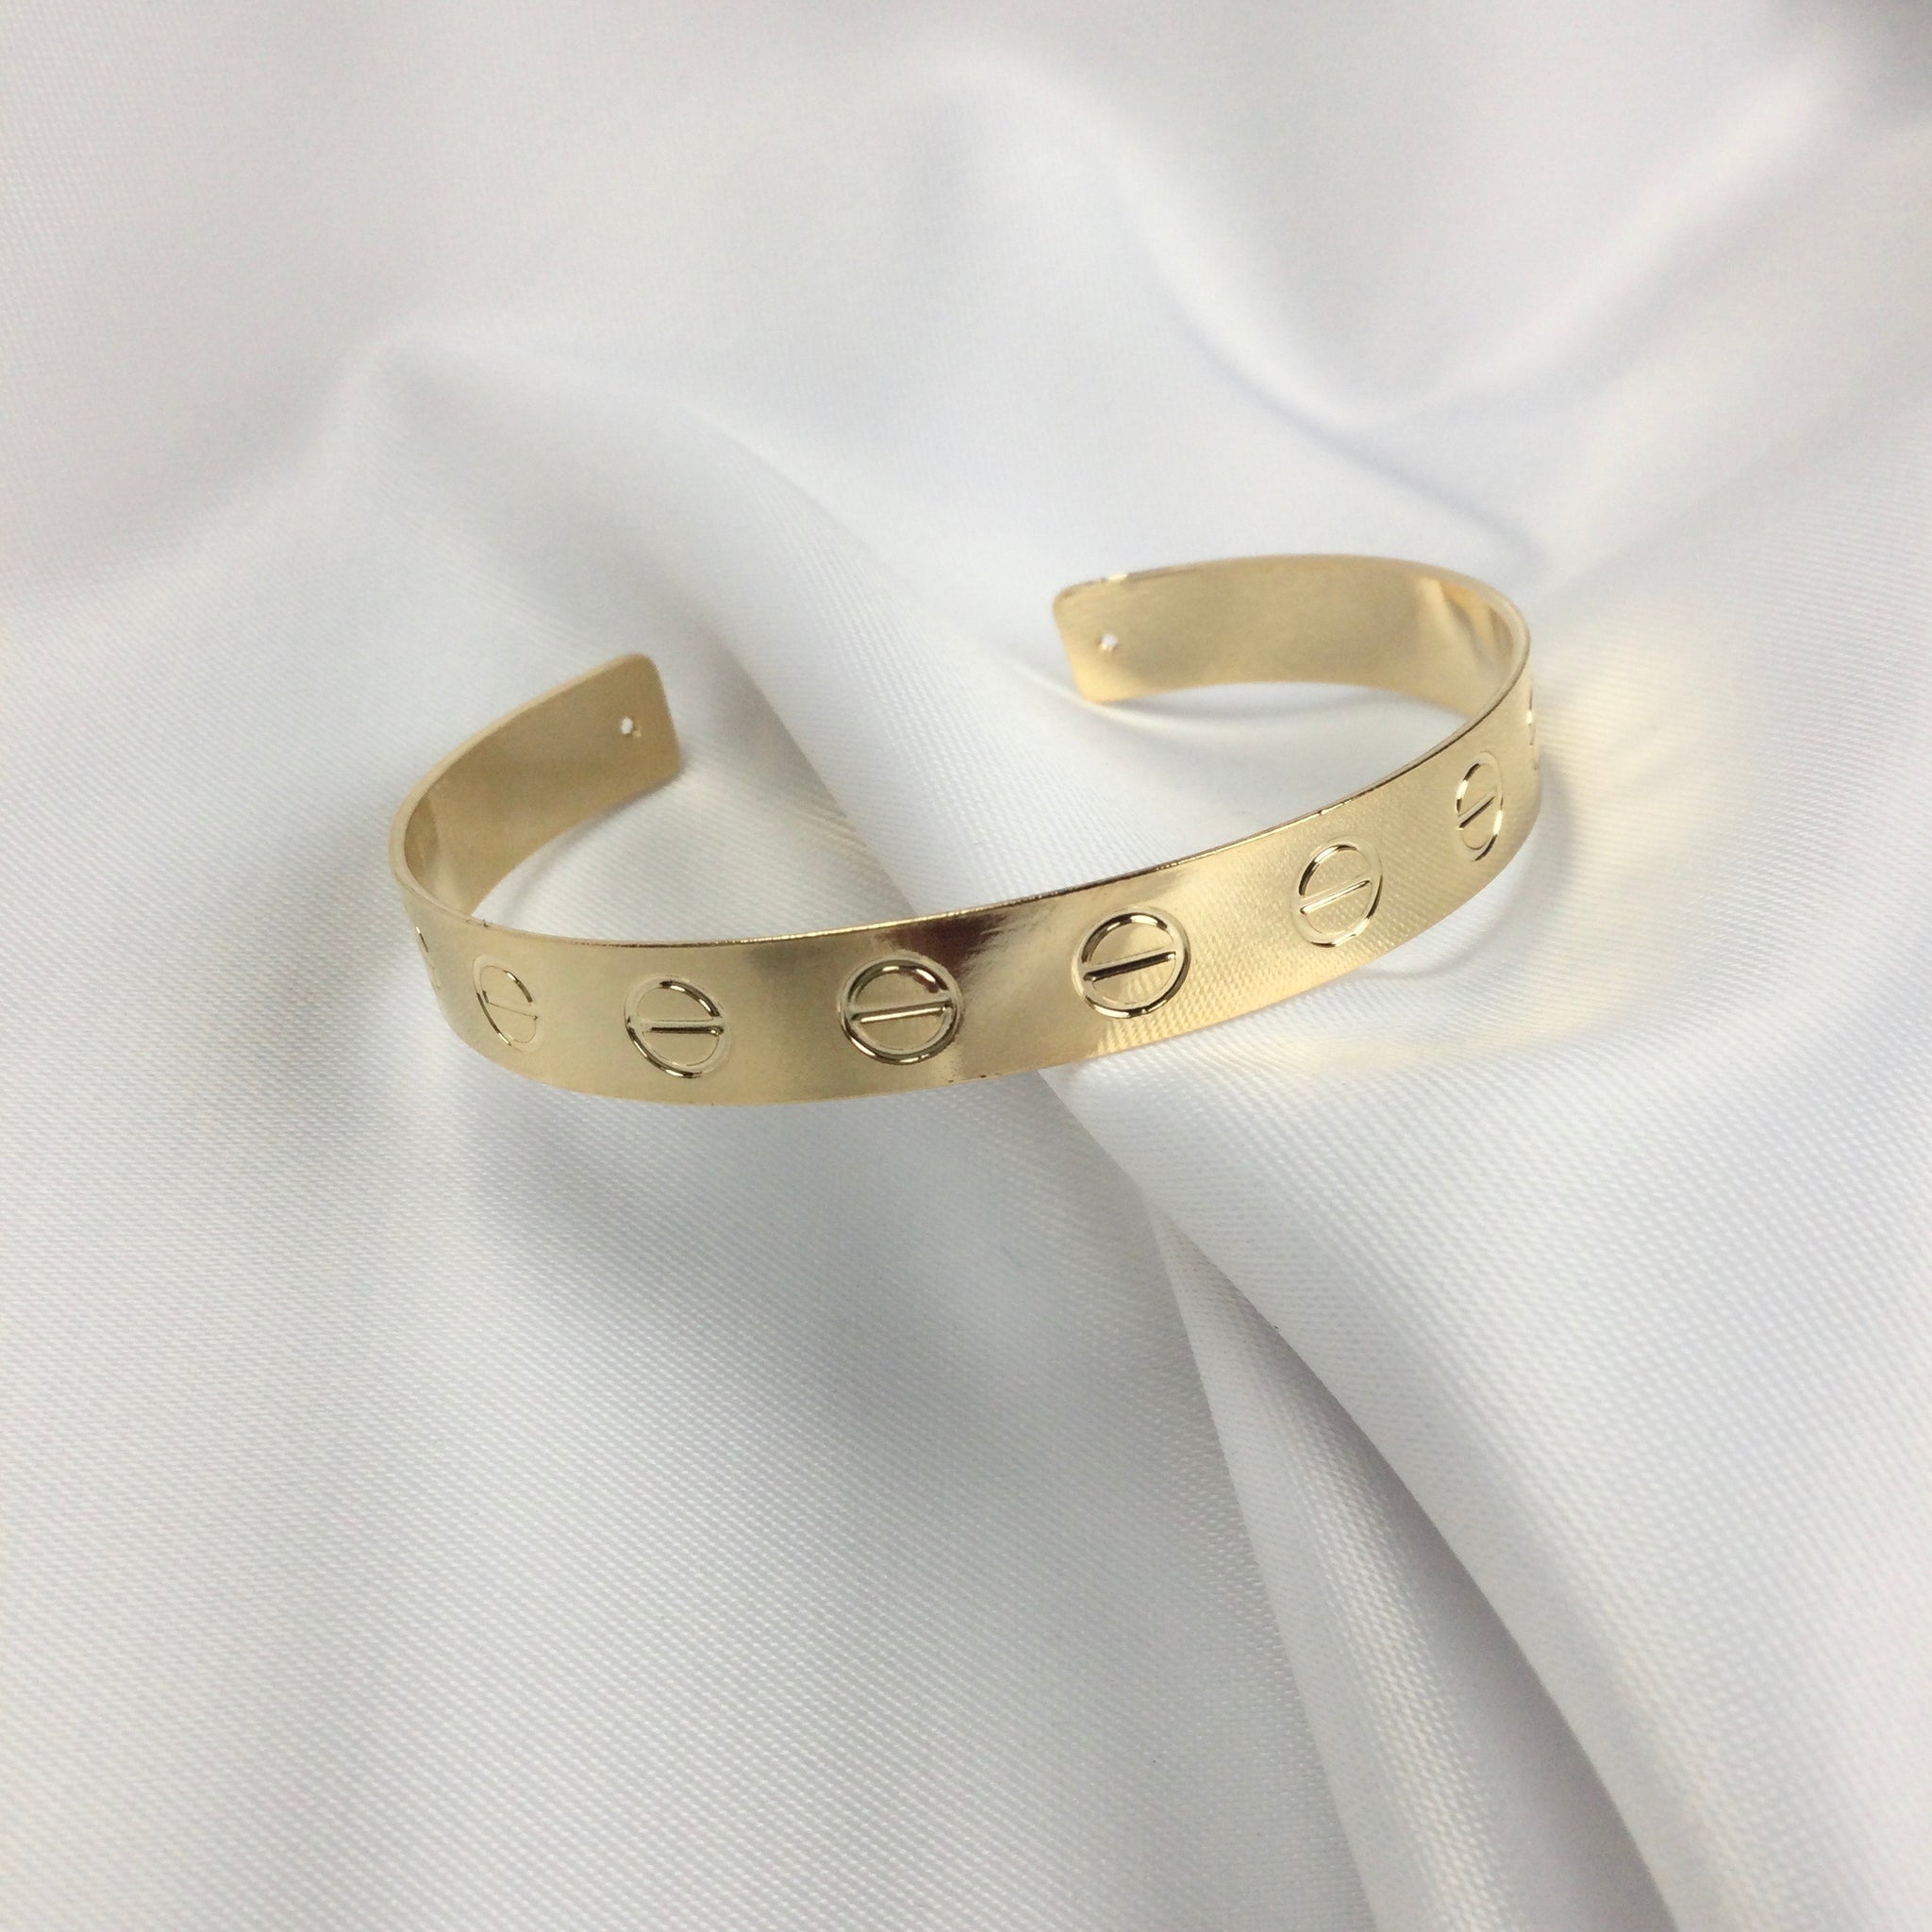 Famous Brand Inspired Half Cuff Bracelet 18k Gold Plated